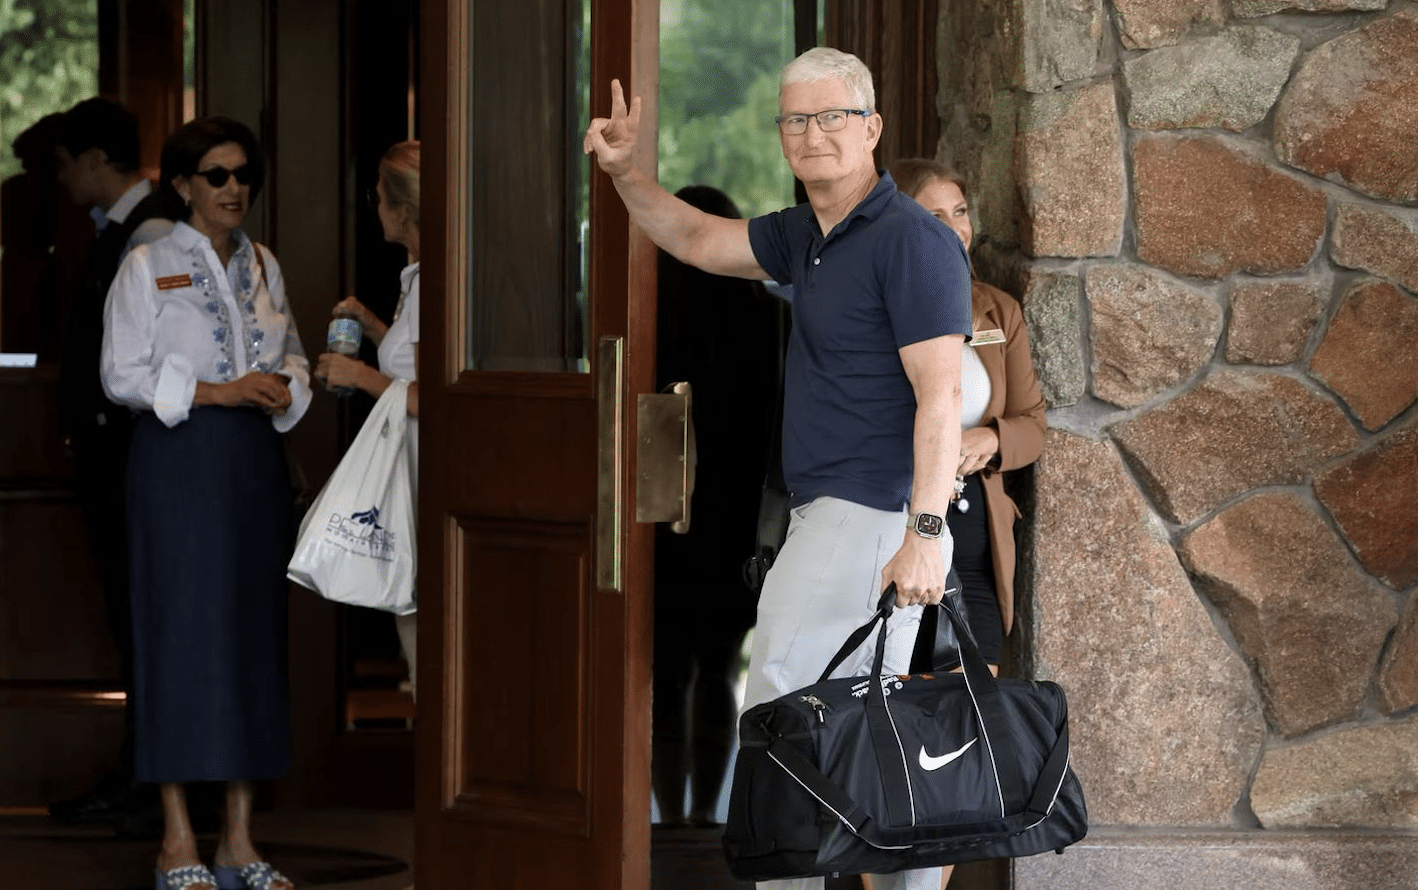 Eddy Cue and Tim Cook arrive in Sun Valley conference